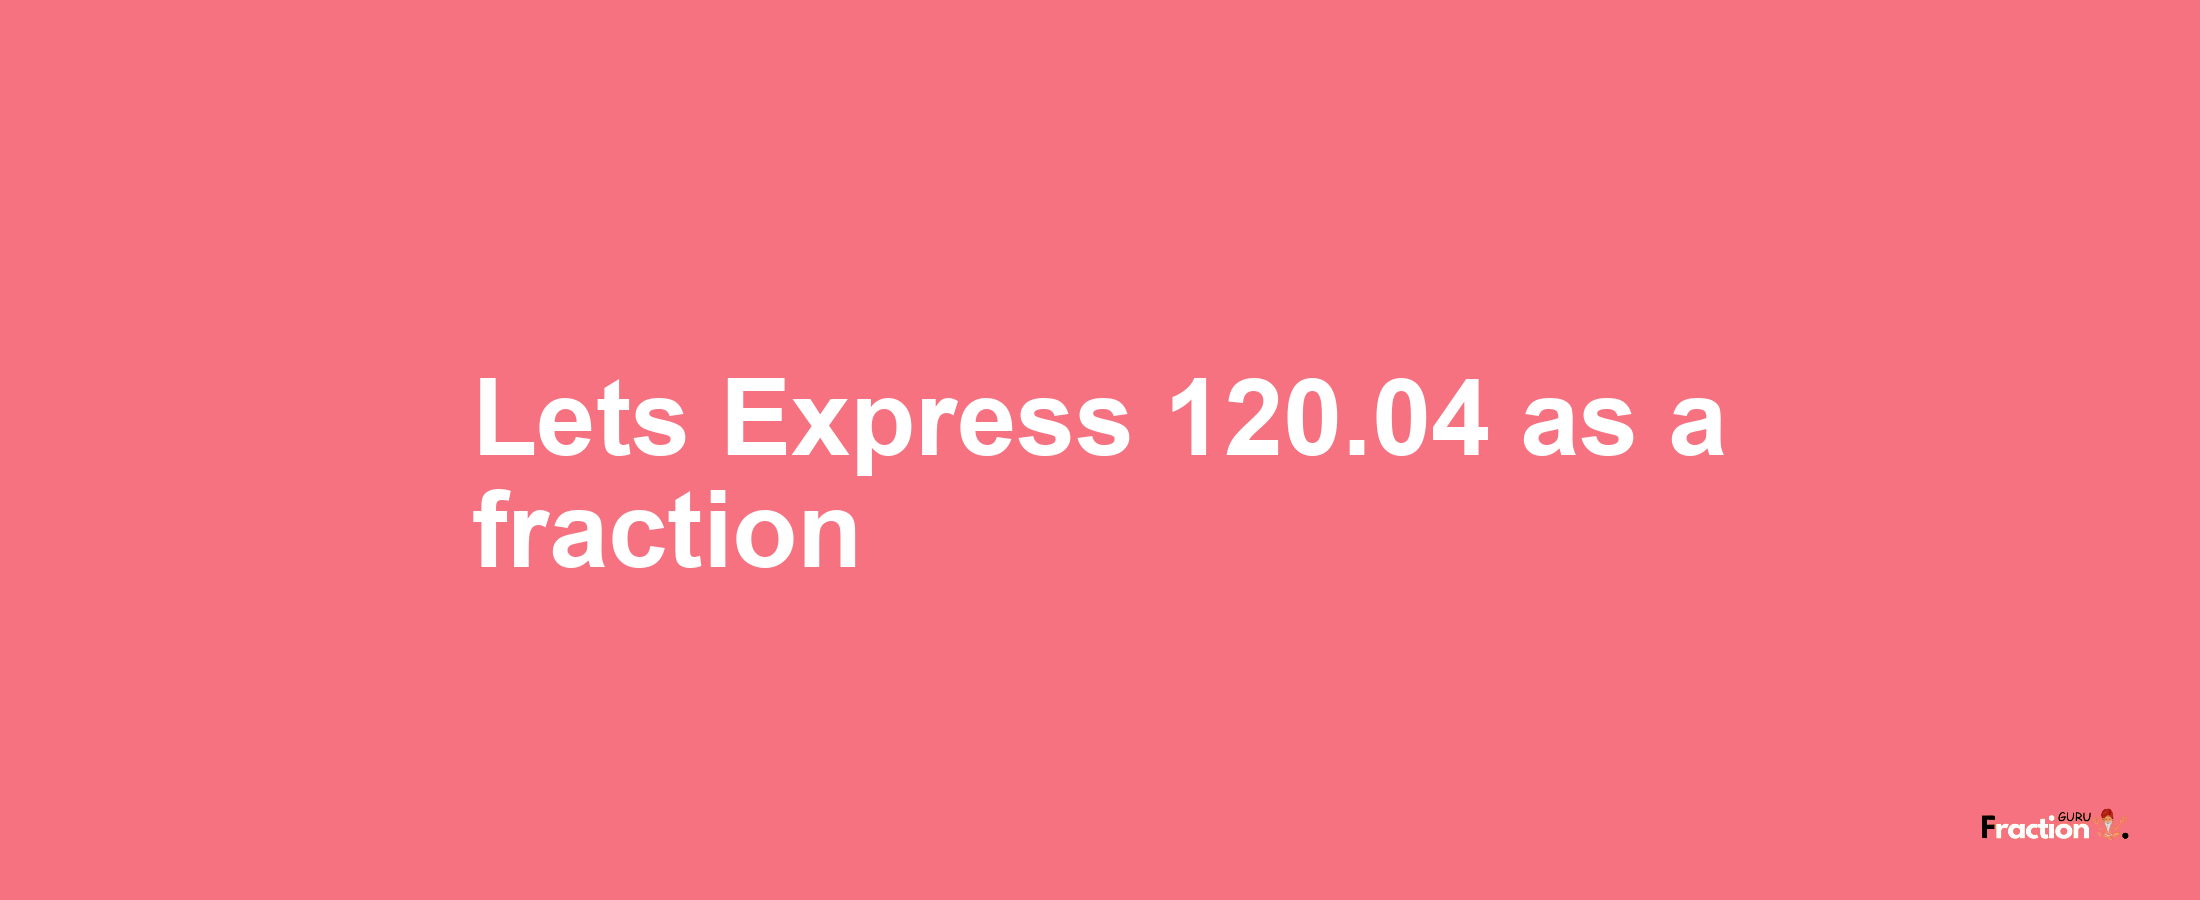 Lets Express 120.04 as afraction